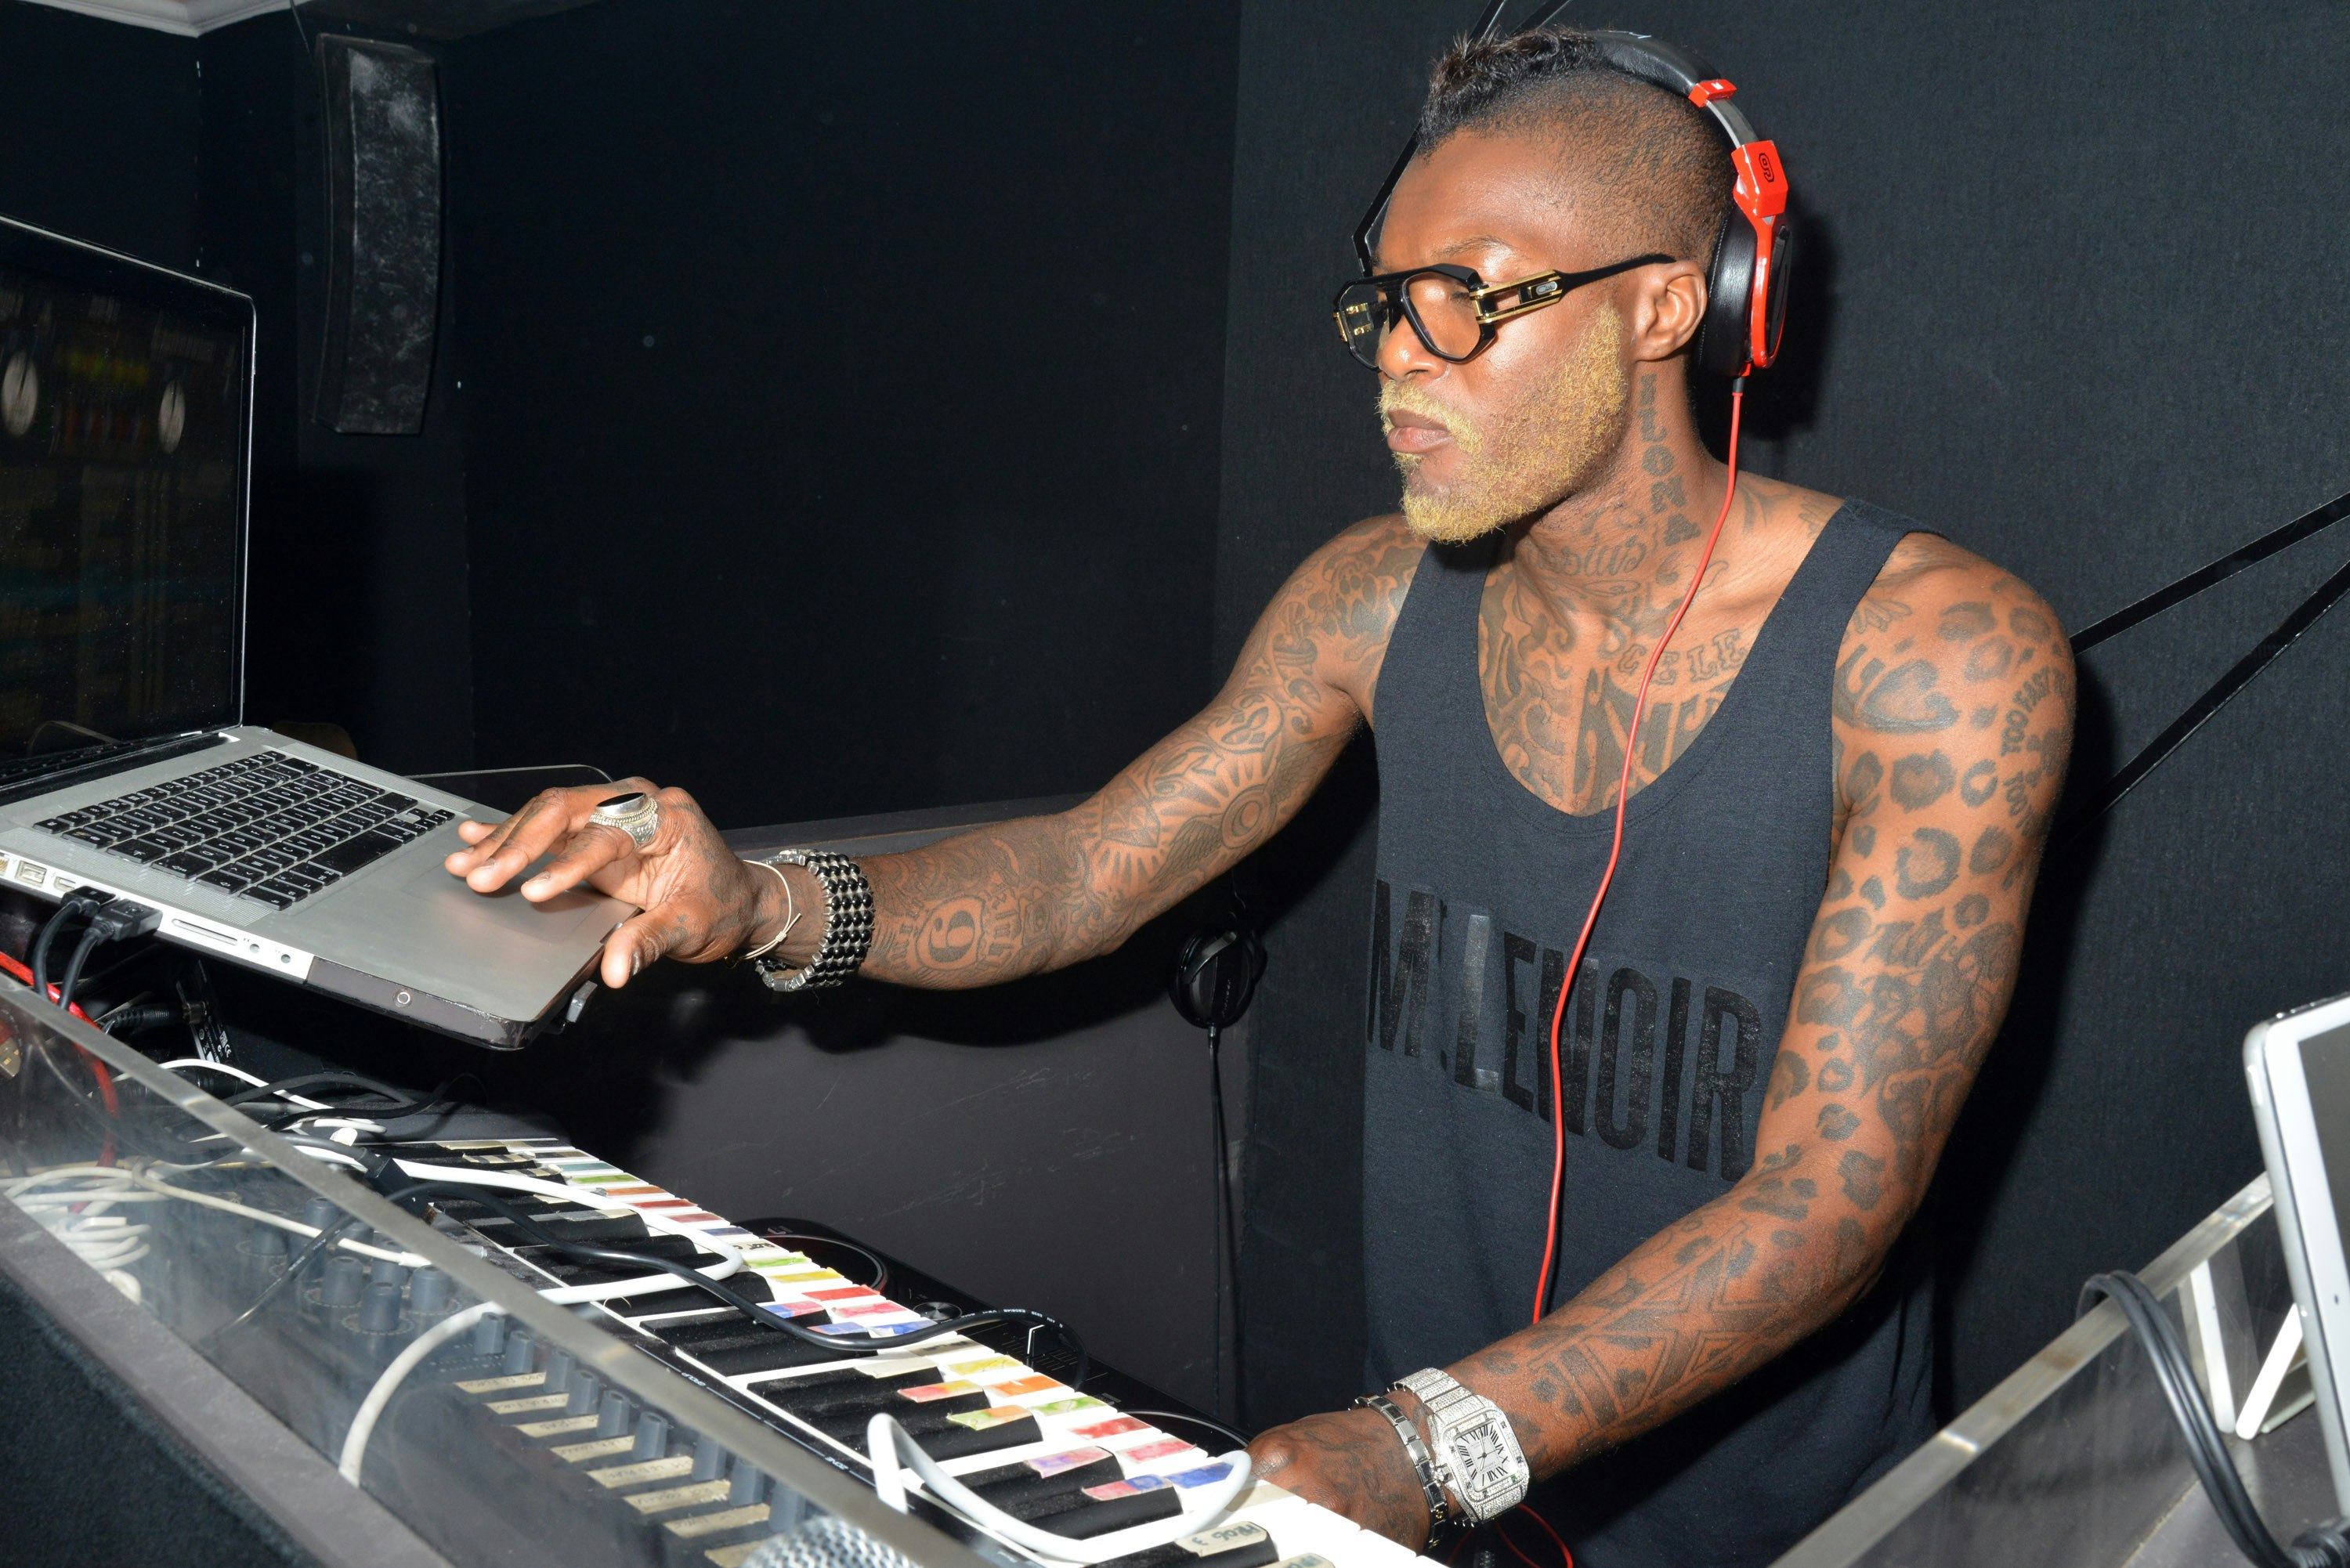 Djibril Cisse DJ Party At The Calavados  : Day 5 - The 68th Annual Cannes Film Festival